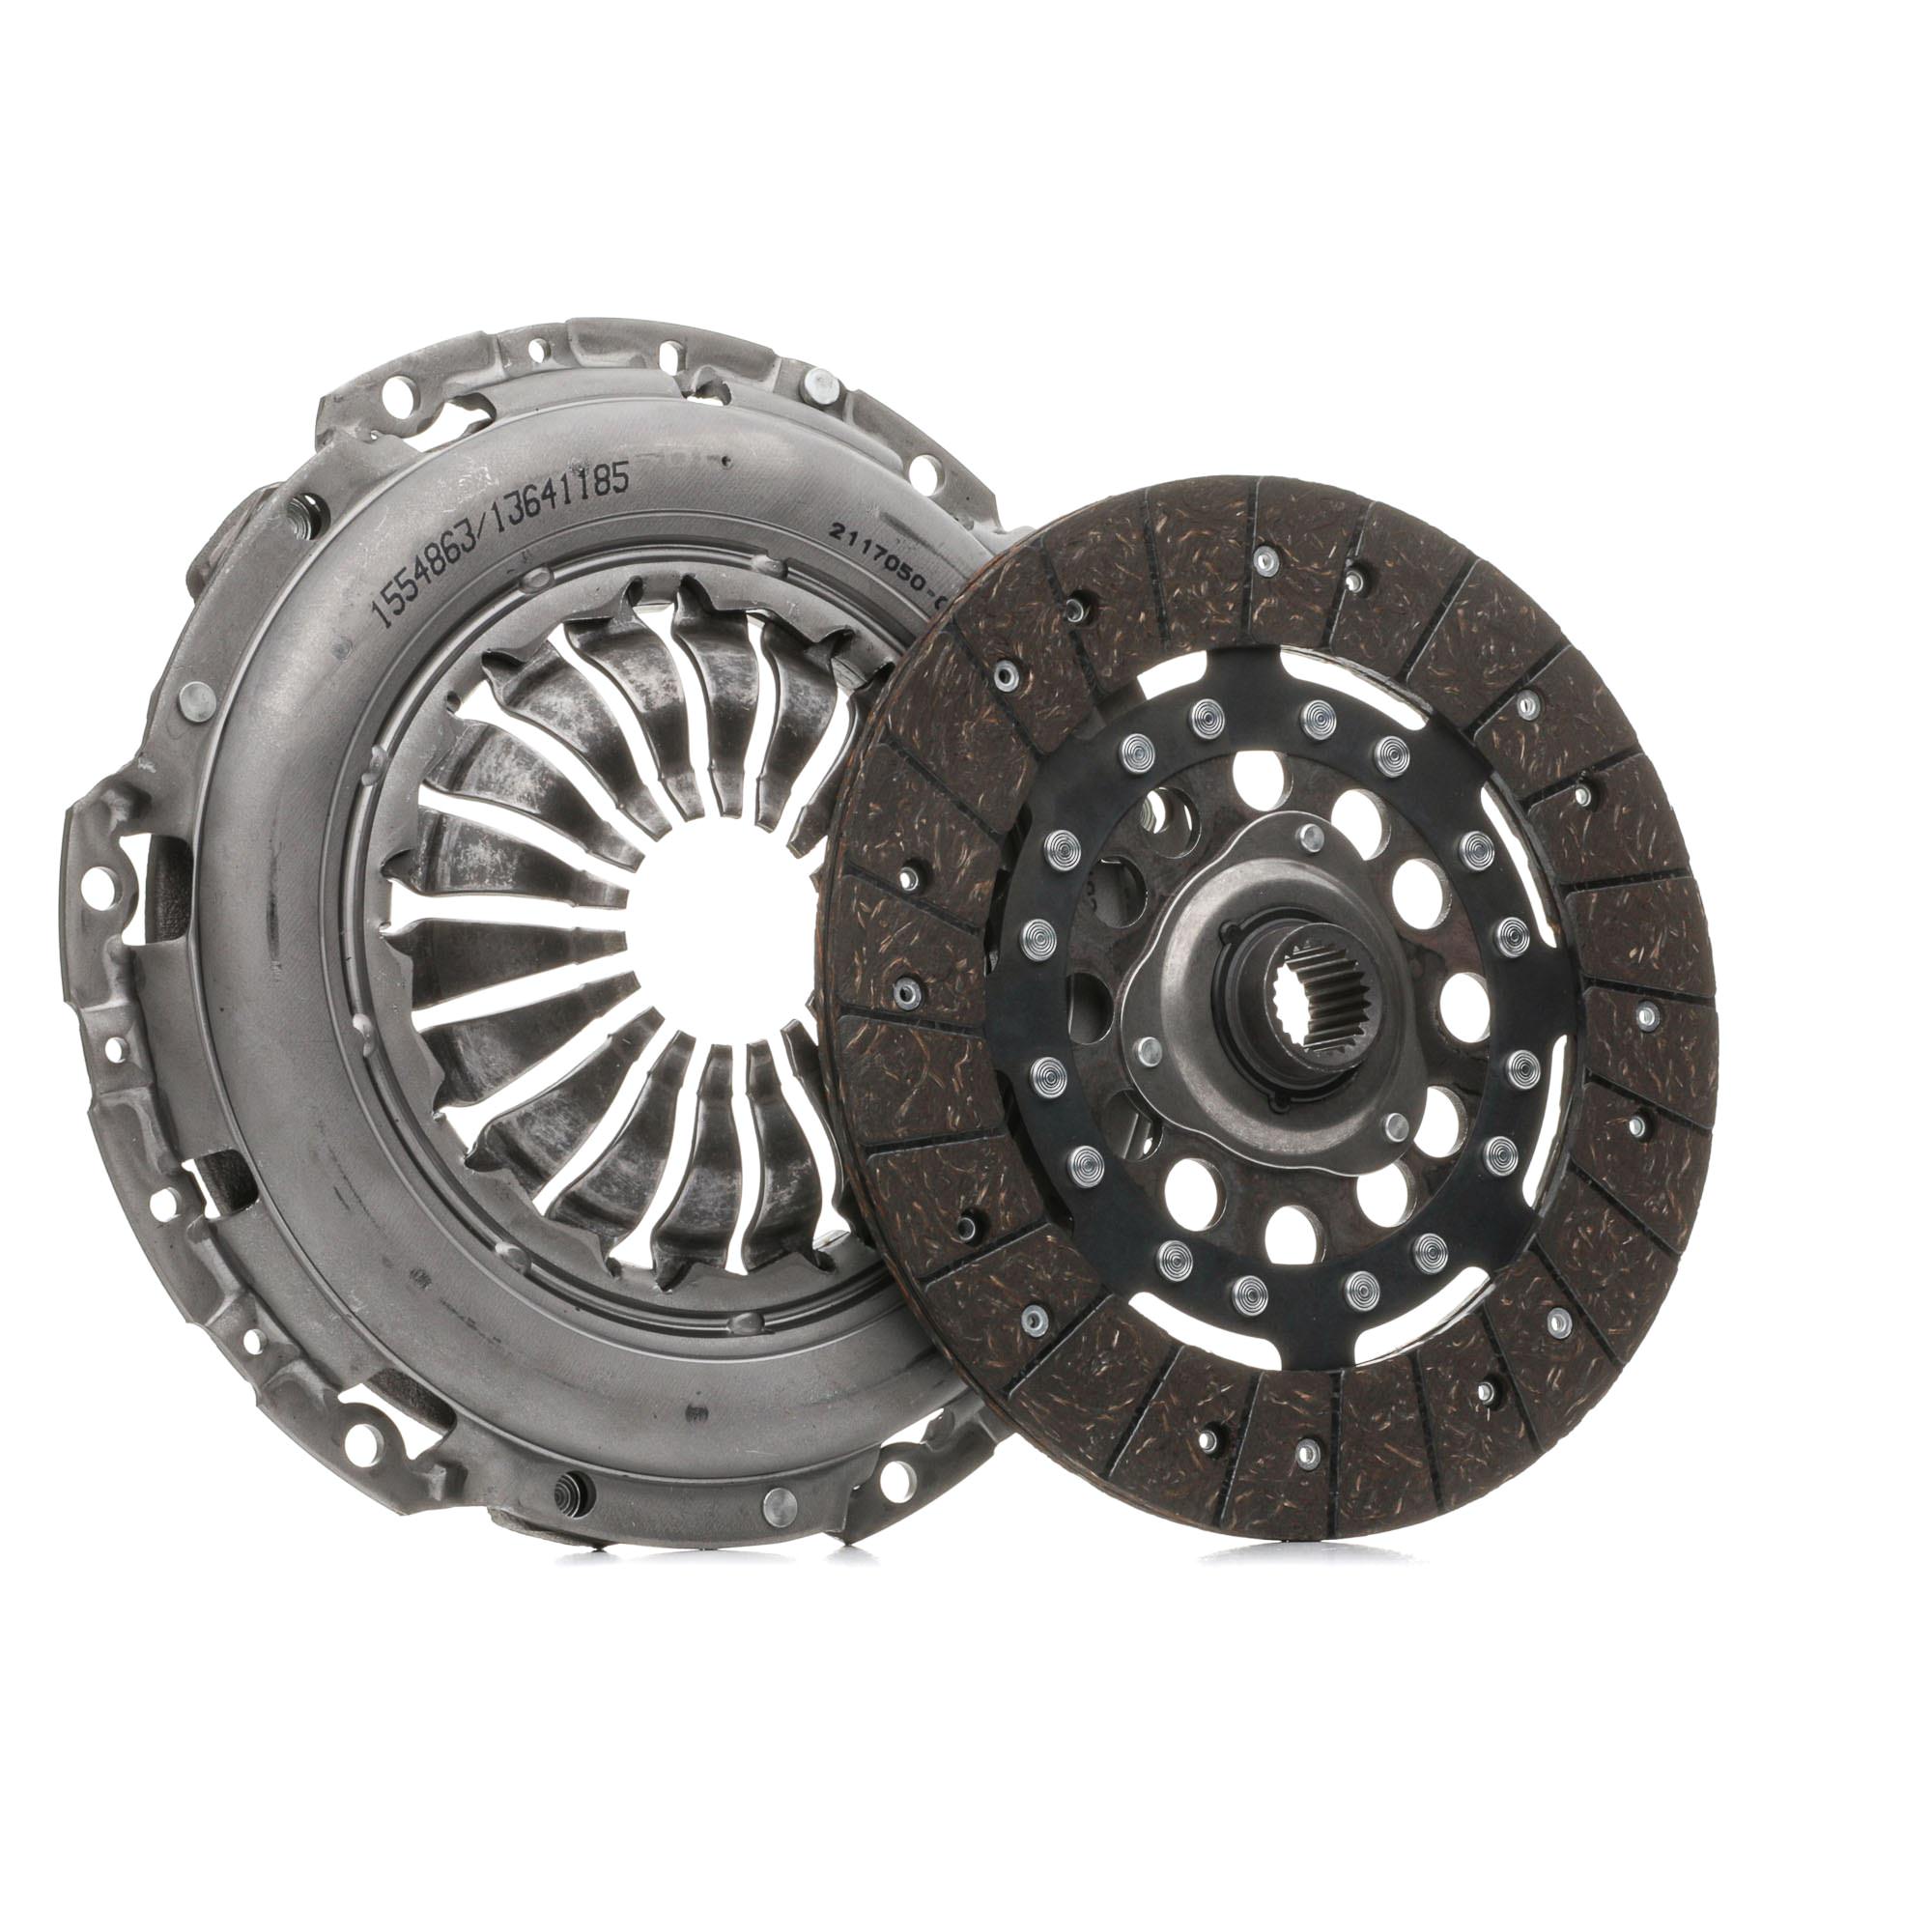 RIDEX 479C0111 Clutch kit for engines with dual-mass flywheel, with clutch pressure plate, with clutch disc, without clutch release bearing, Requires special tools for mounting, Check and replace dual-mass flywheel if necessary., with automatic adjustment, 240mm